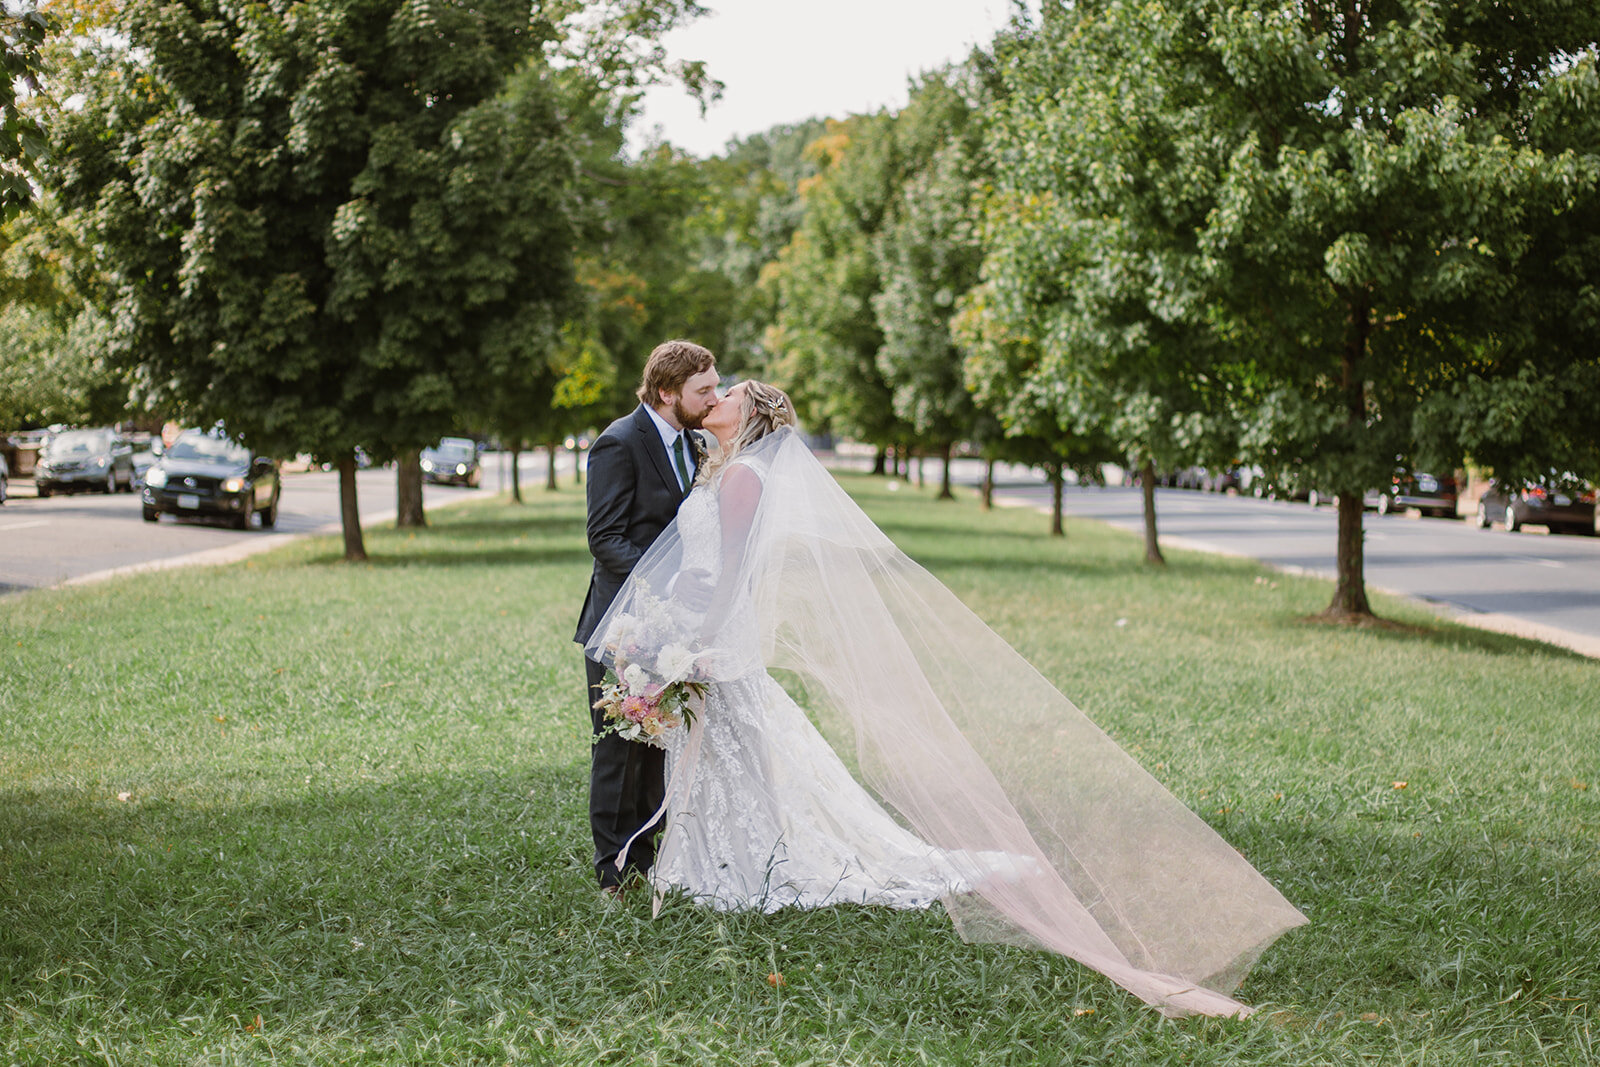  Pink cathedral veil. Wedding day portraits in The Fan, Richmond, VA. 